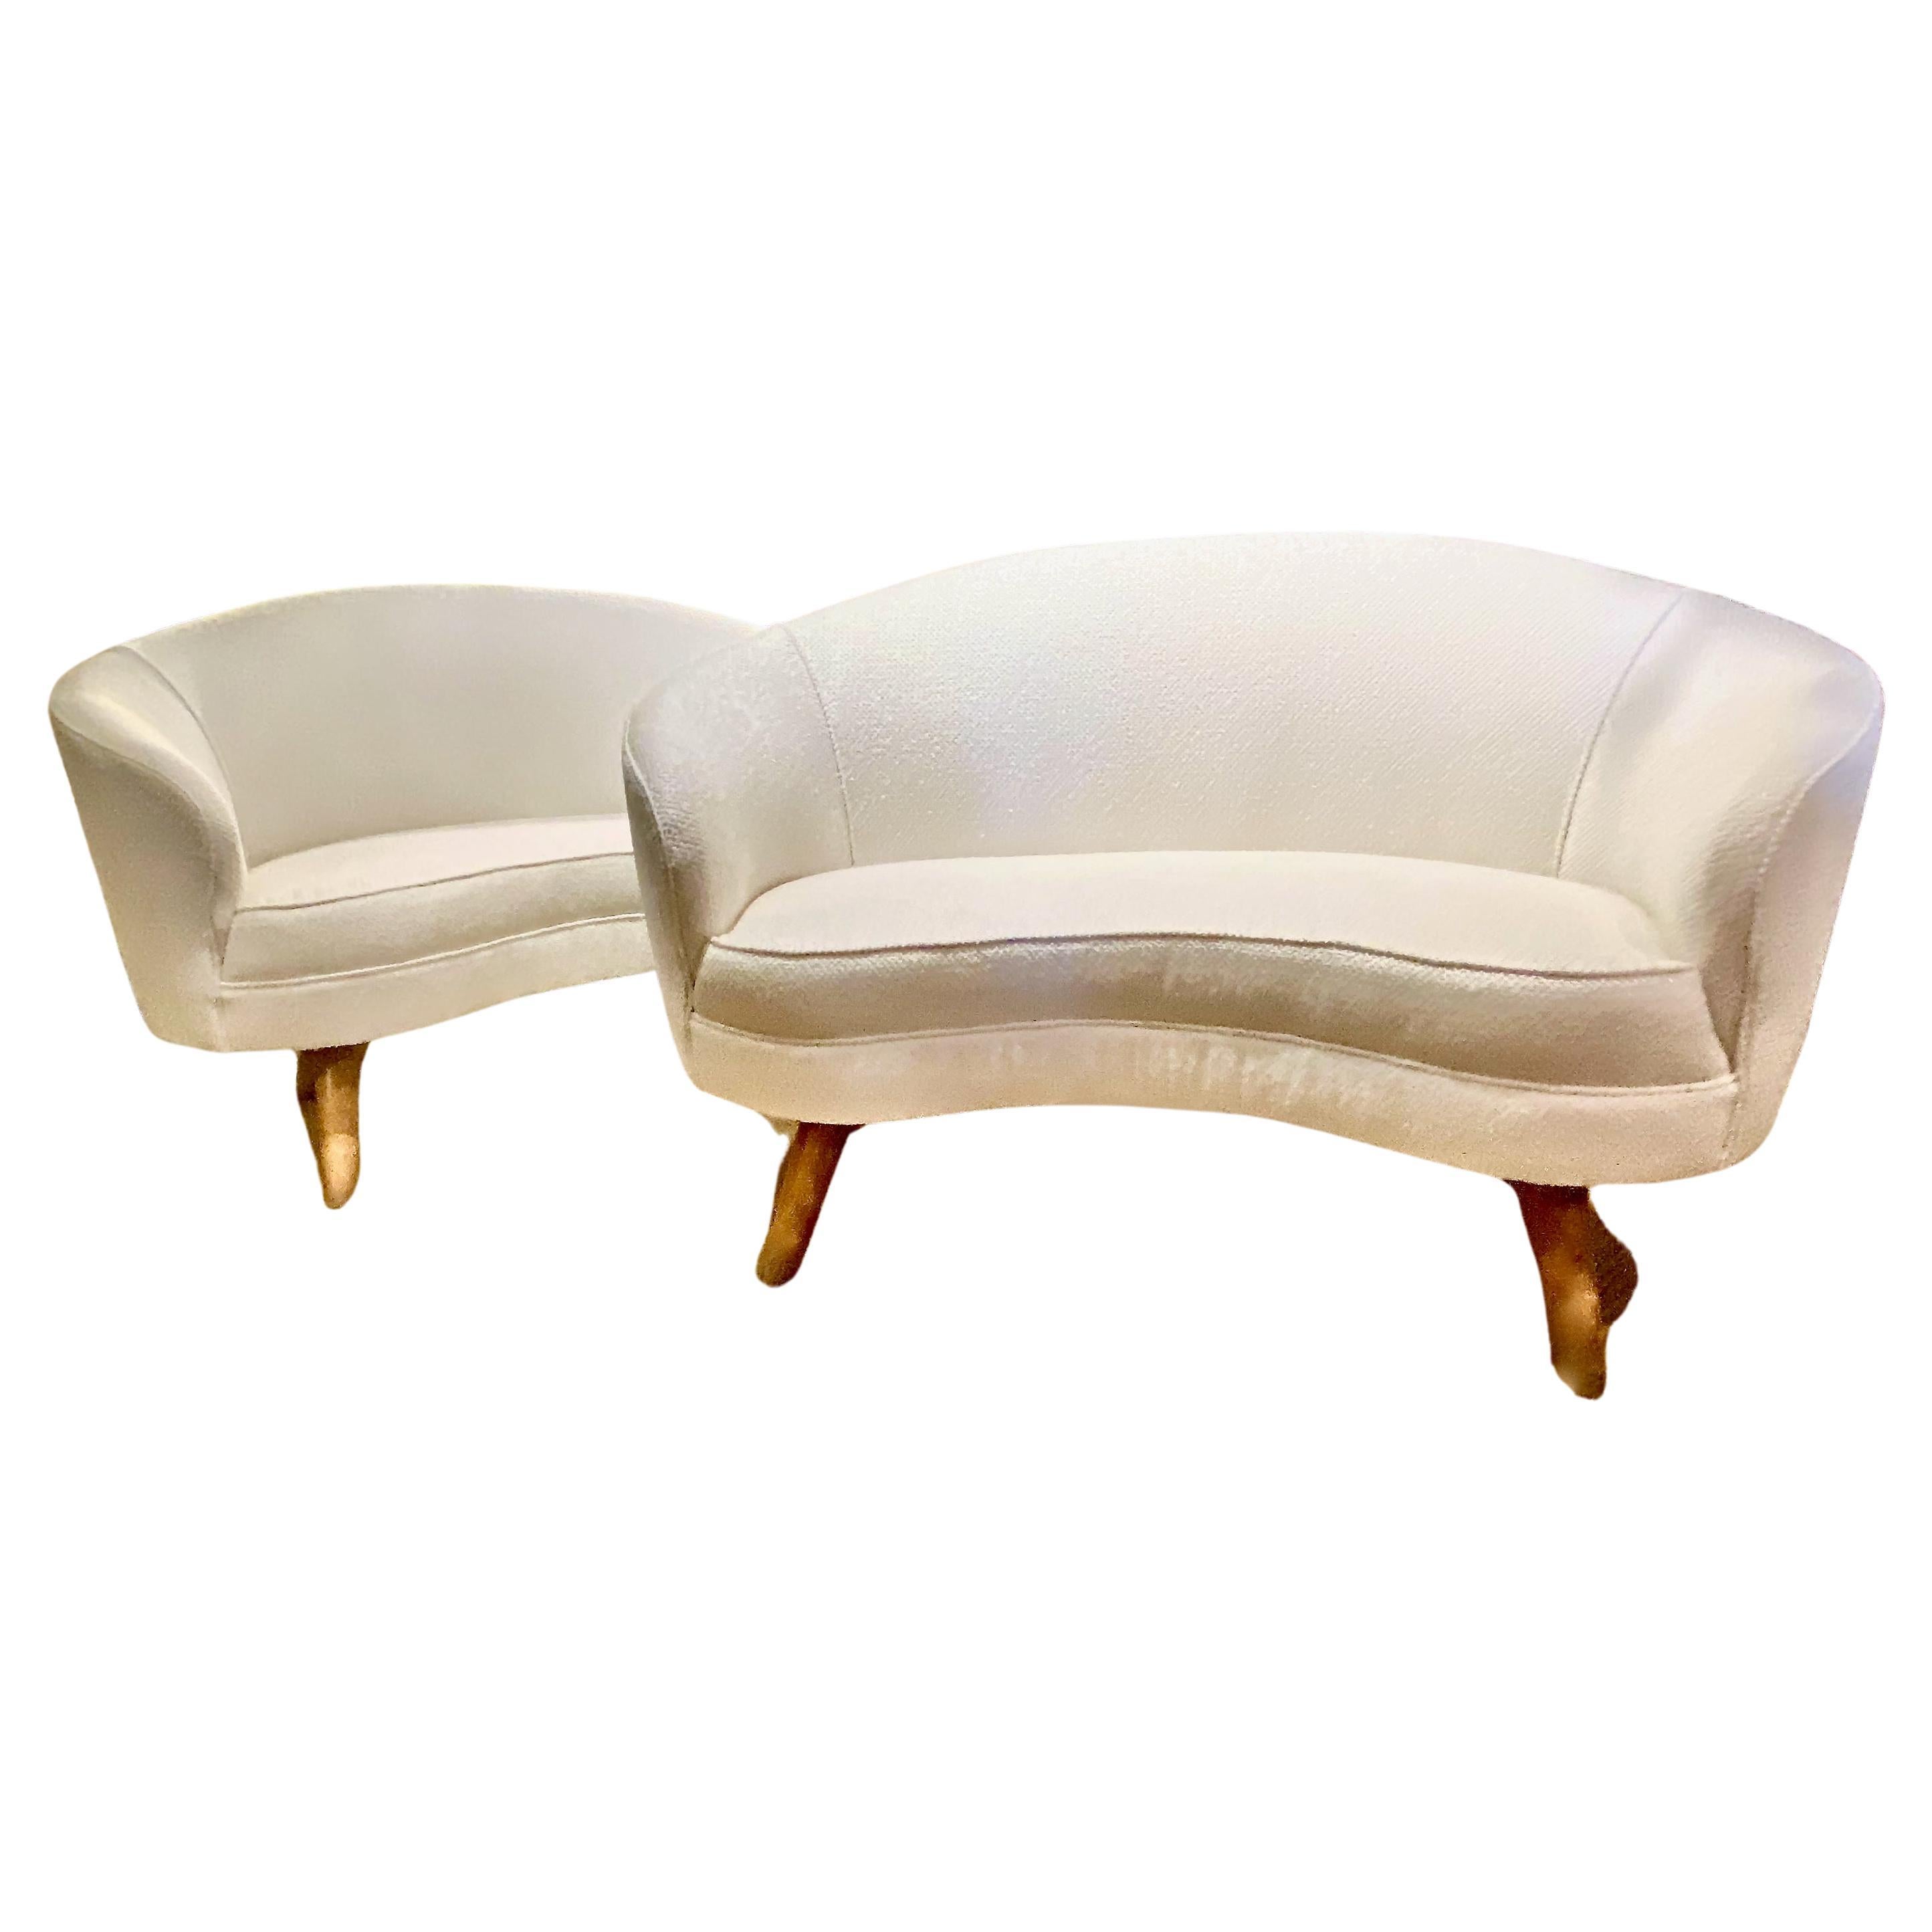 This is an unusual pair of Tor Wolfenstein small sofas that are newly upholstered in a high-end white boucle. The quality of design and condition of the sofas speak to their desirability. Tor Wolfenstein pieces are uncommon and highly desirable. A